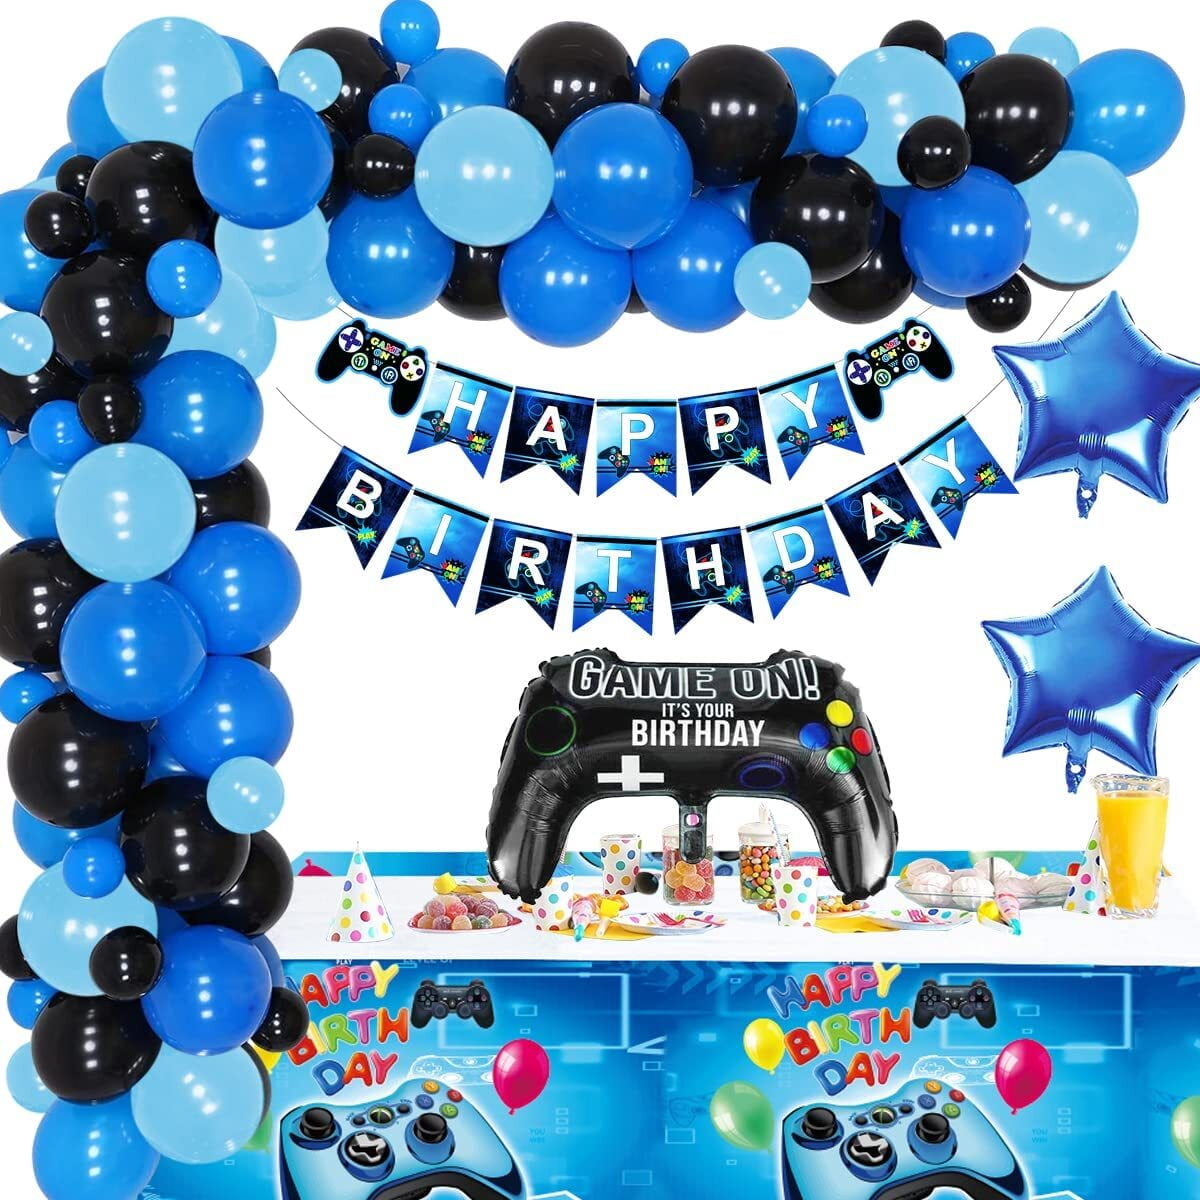 58 Pcs Game Birthday Decorations,Included Banner,Tablecloth,Hanging Swirls,Cake Topper,Cupcake Toppers,Backdrop,Balloon,Game Tableware Set for Boy